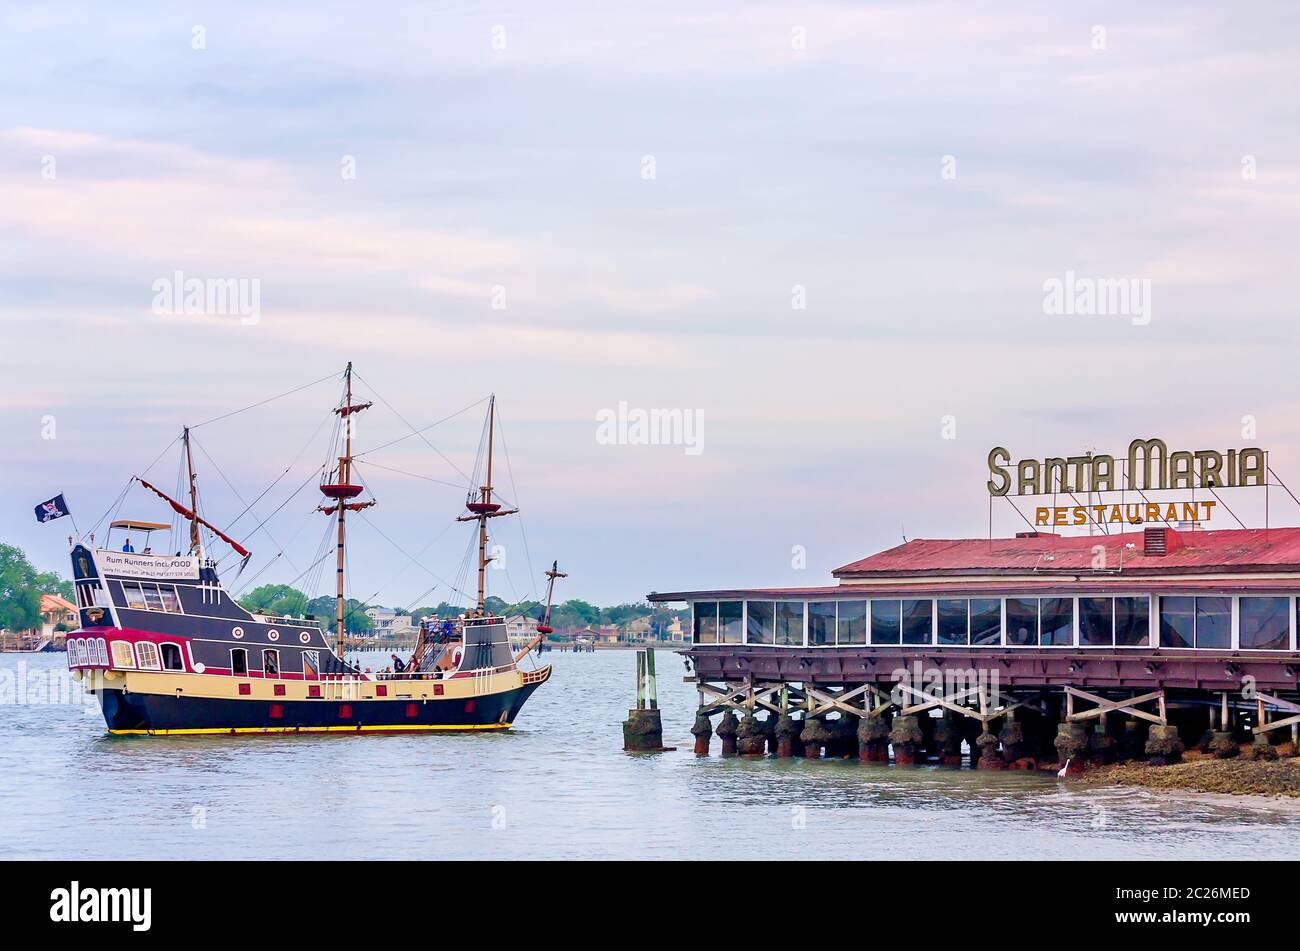 The Black Raven pirate ship takes tourists on a rum runners cruise near the Santa Maria restaurant, April 10, 2015, in St. Augustine, Florida. Stock Photo